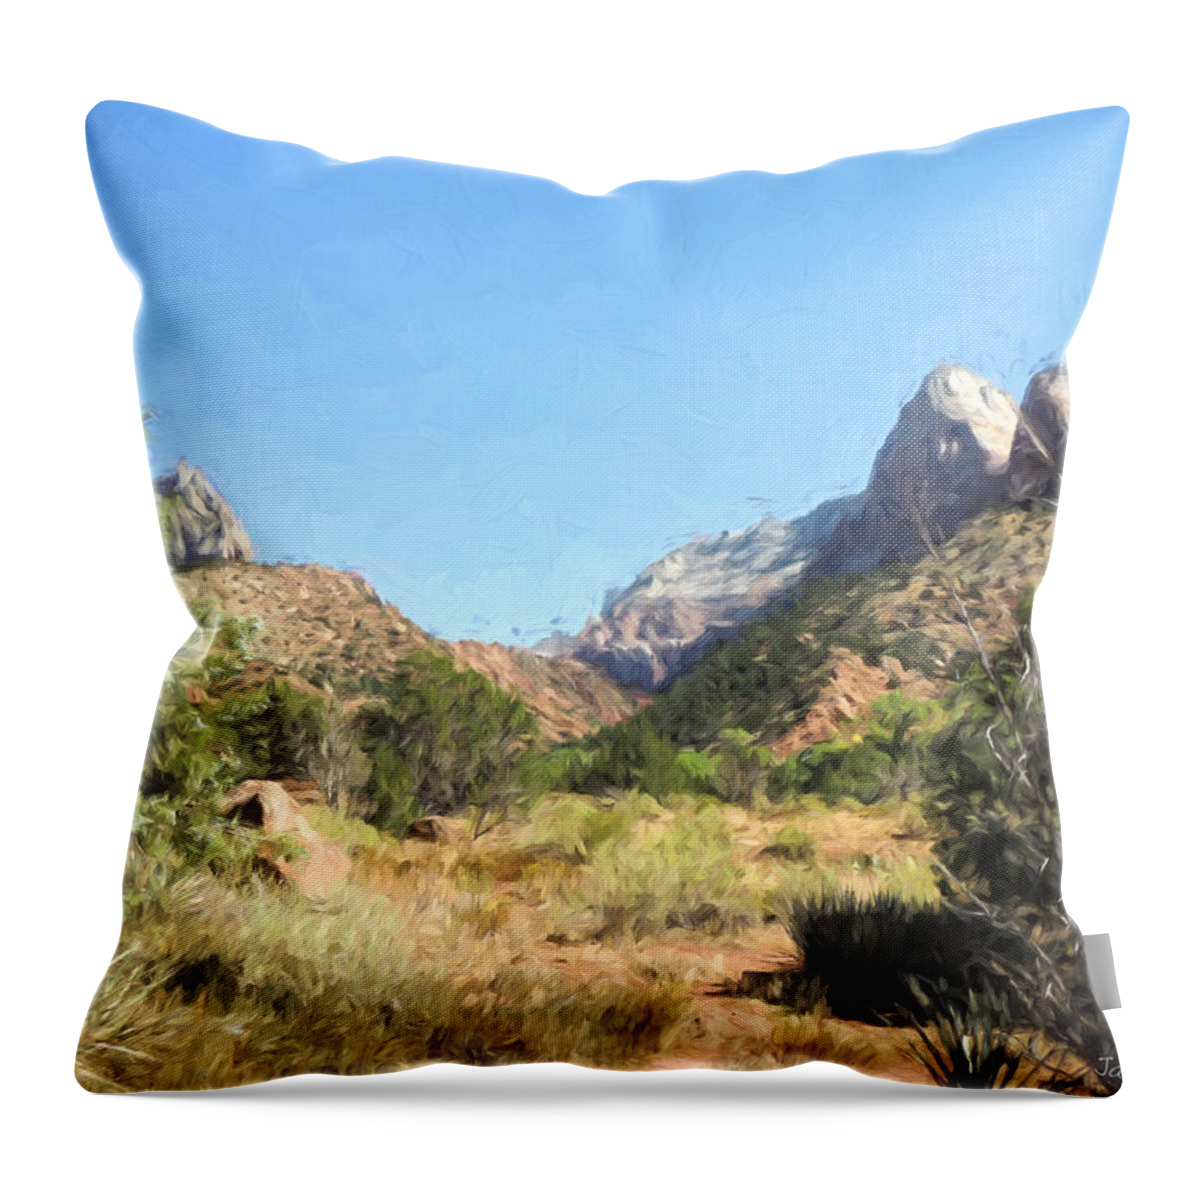 Digital Painting Throw Pillow featuring the digital art Beautiful Zion by Jayne Wilson